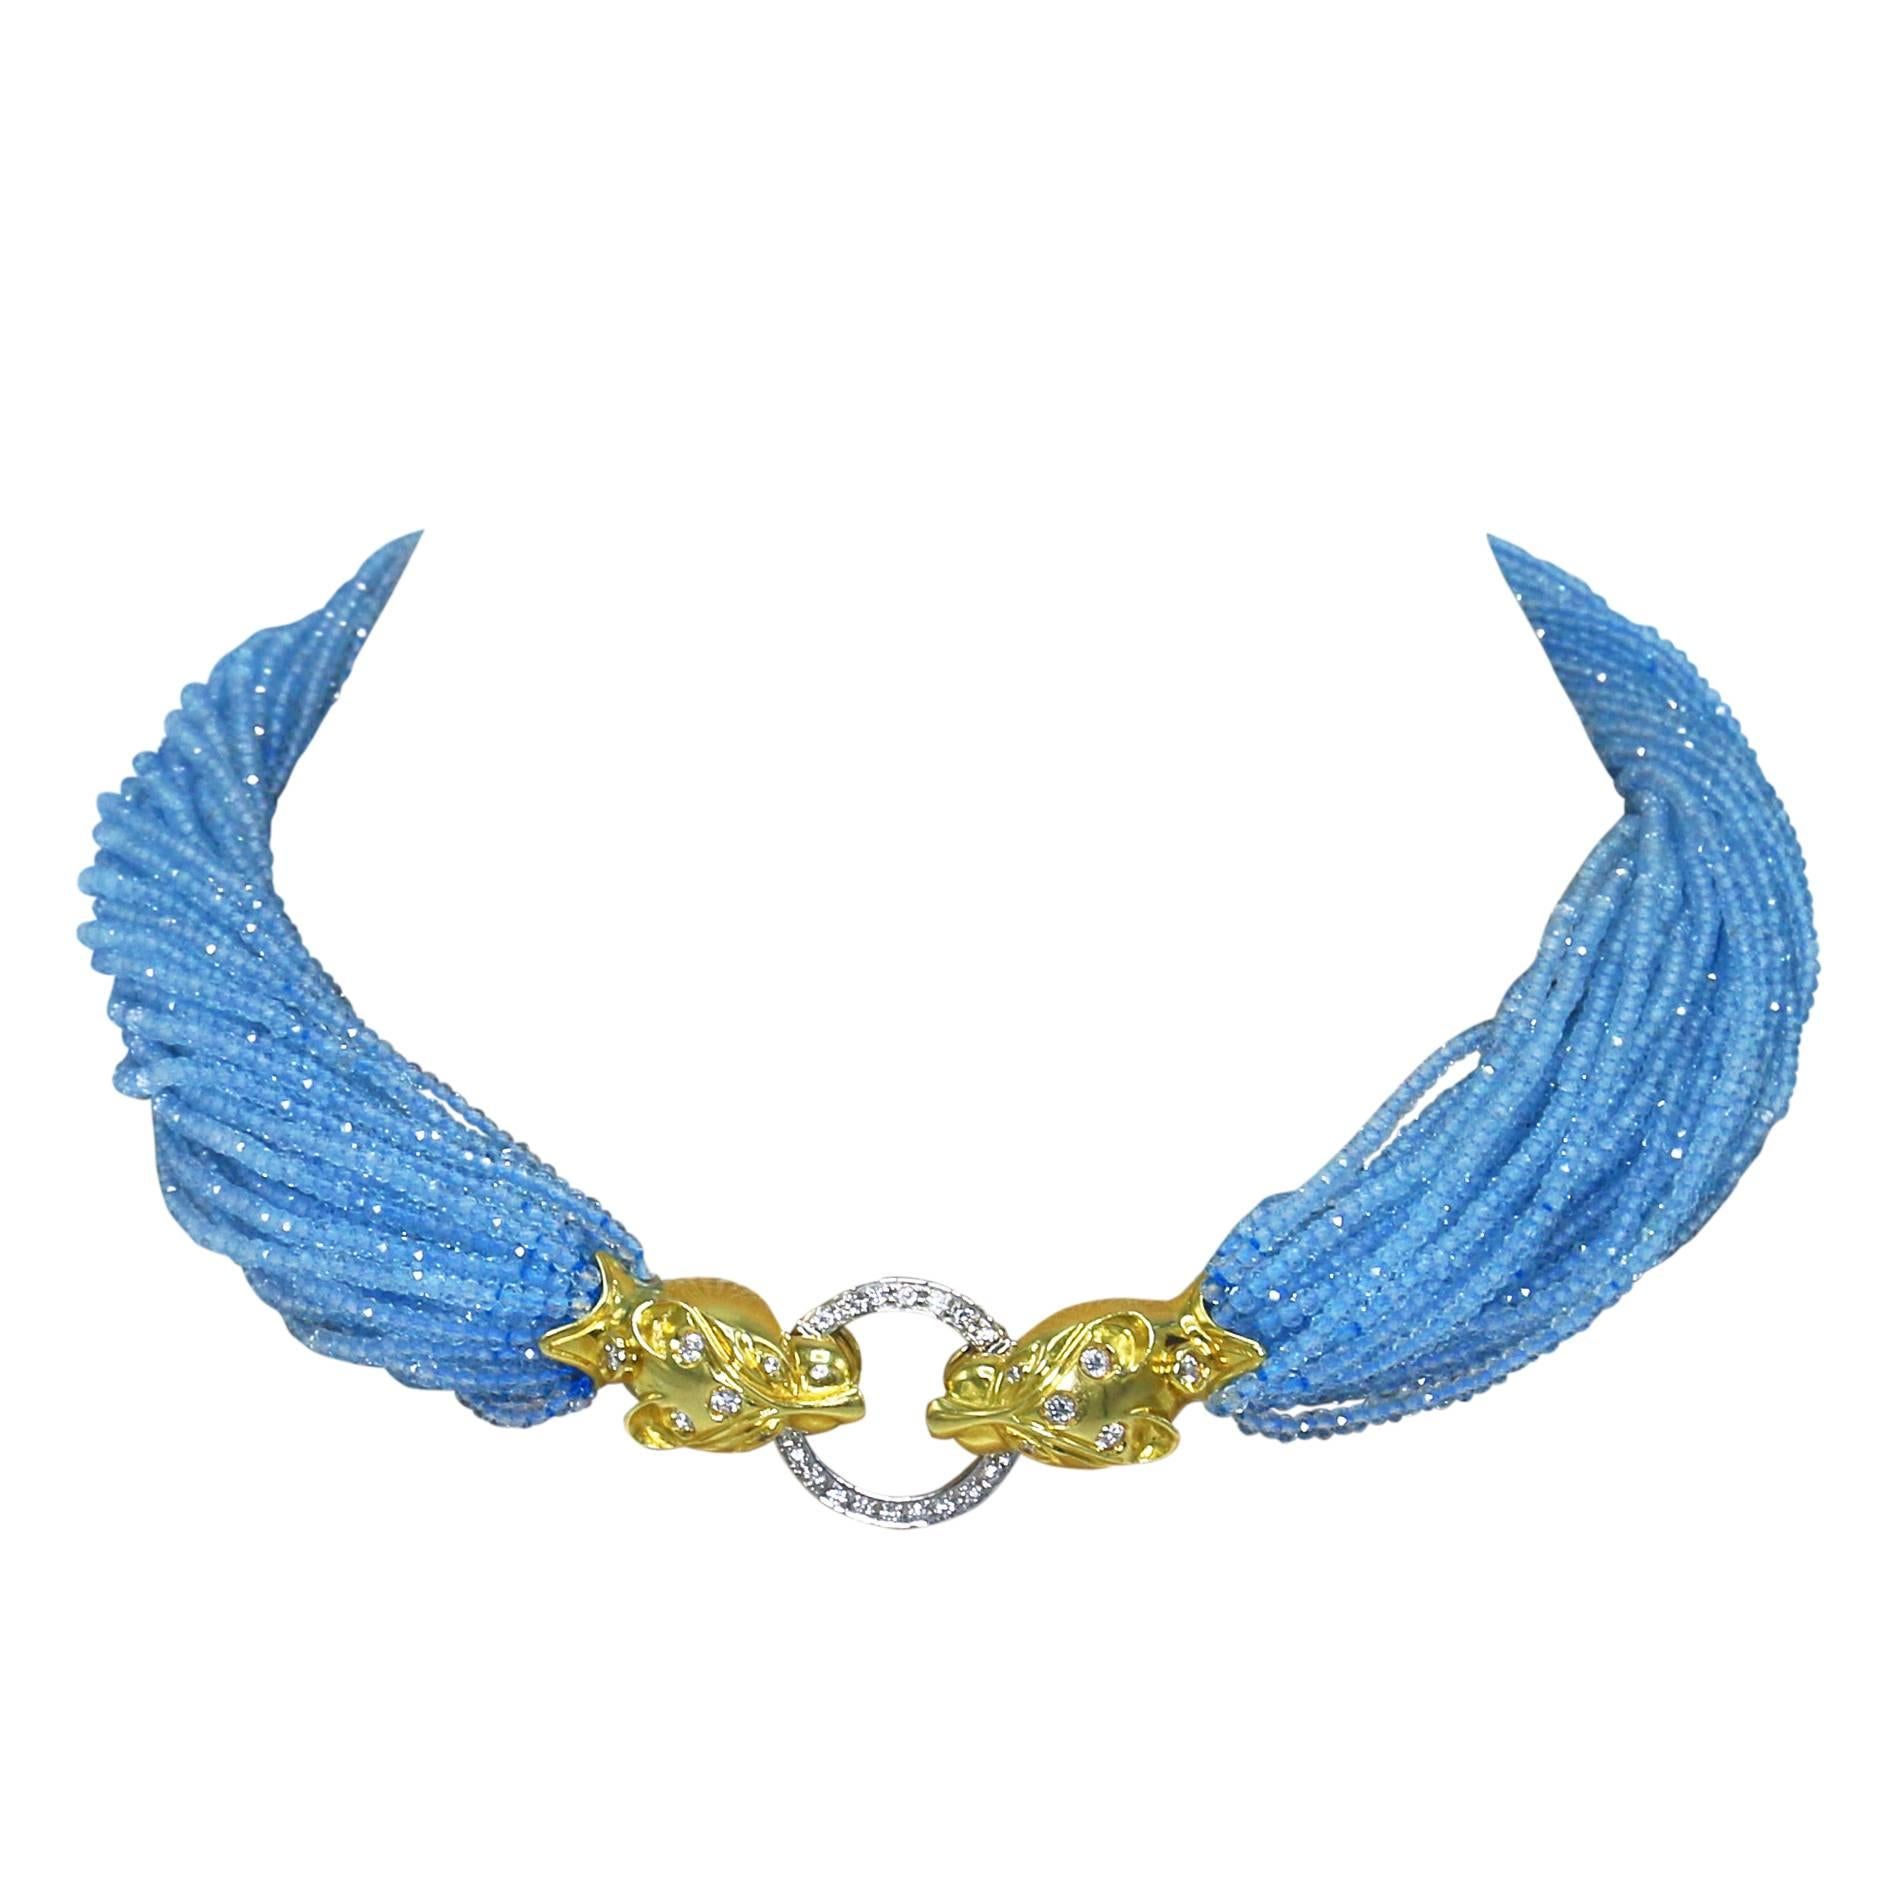 18 karat yellow gold, diamond and blue topaz bead torsade necklace, designed as multiple strands of blue topaz beads, connected at the center by two panther heads supporting a ring in their mouths, set throughout with round diamonds weighing